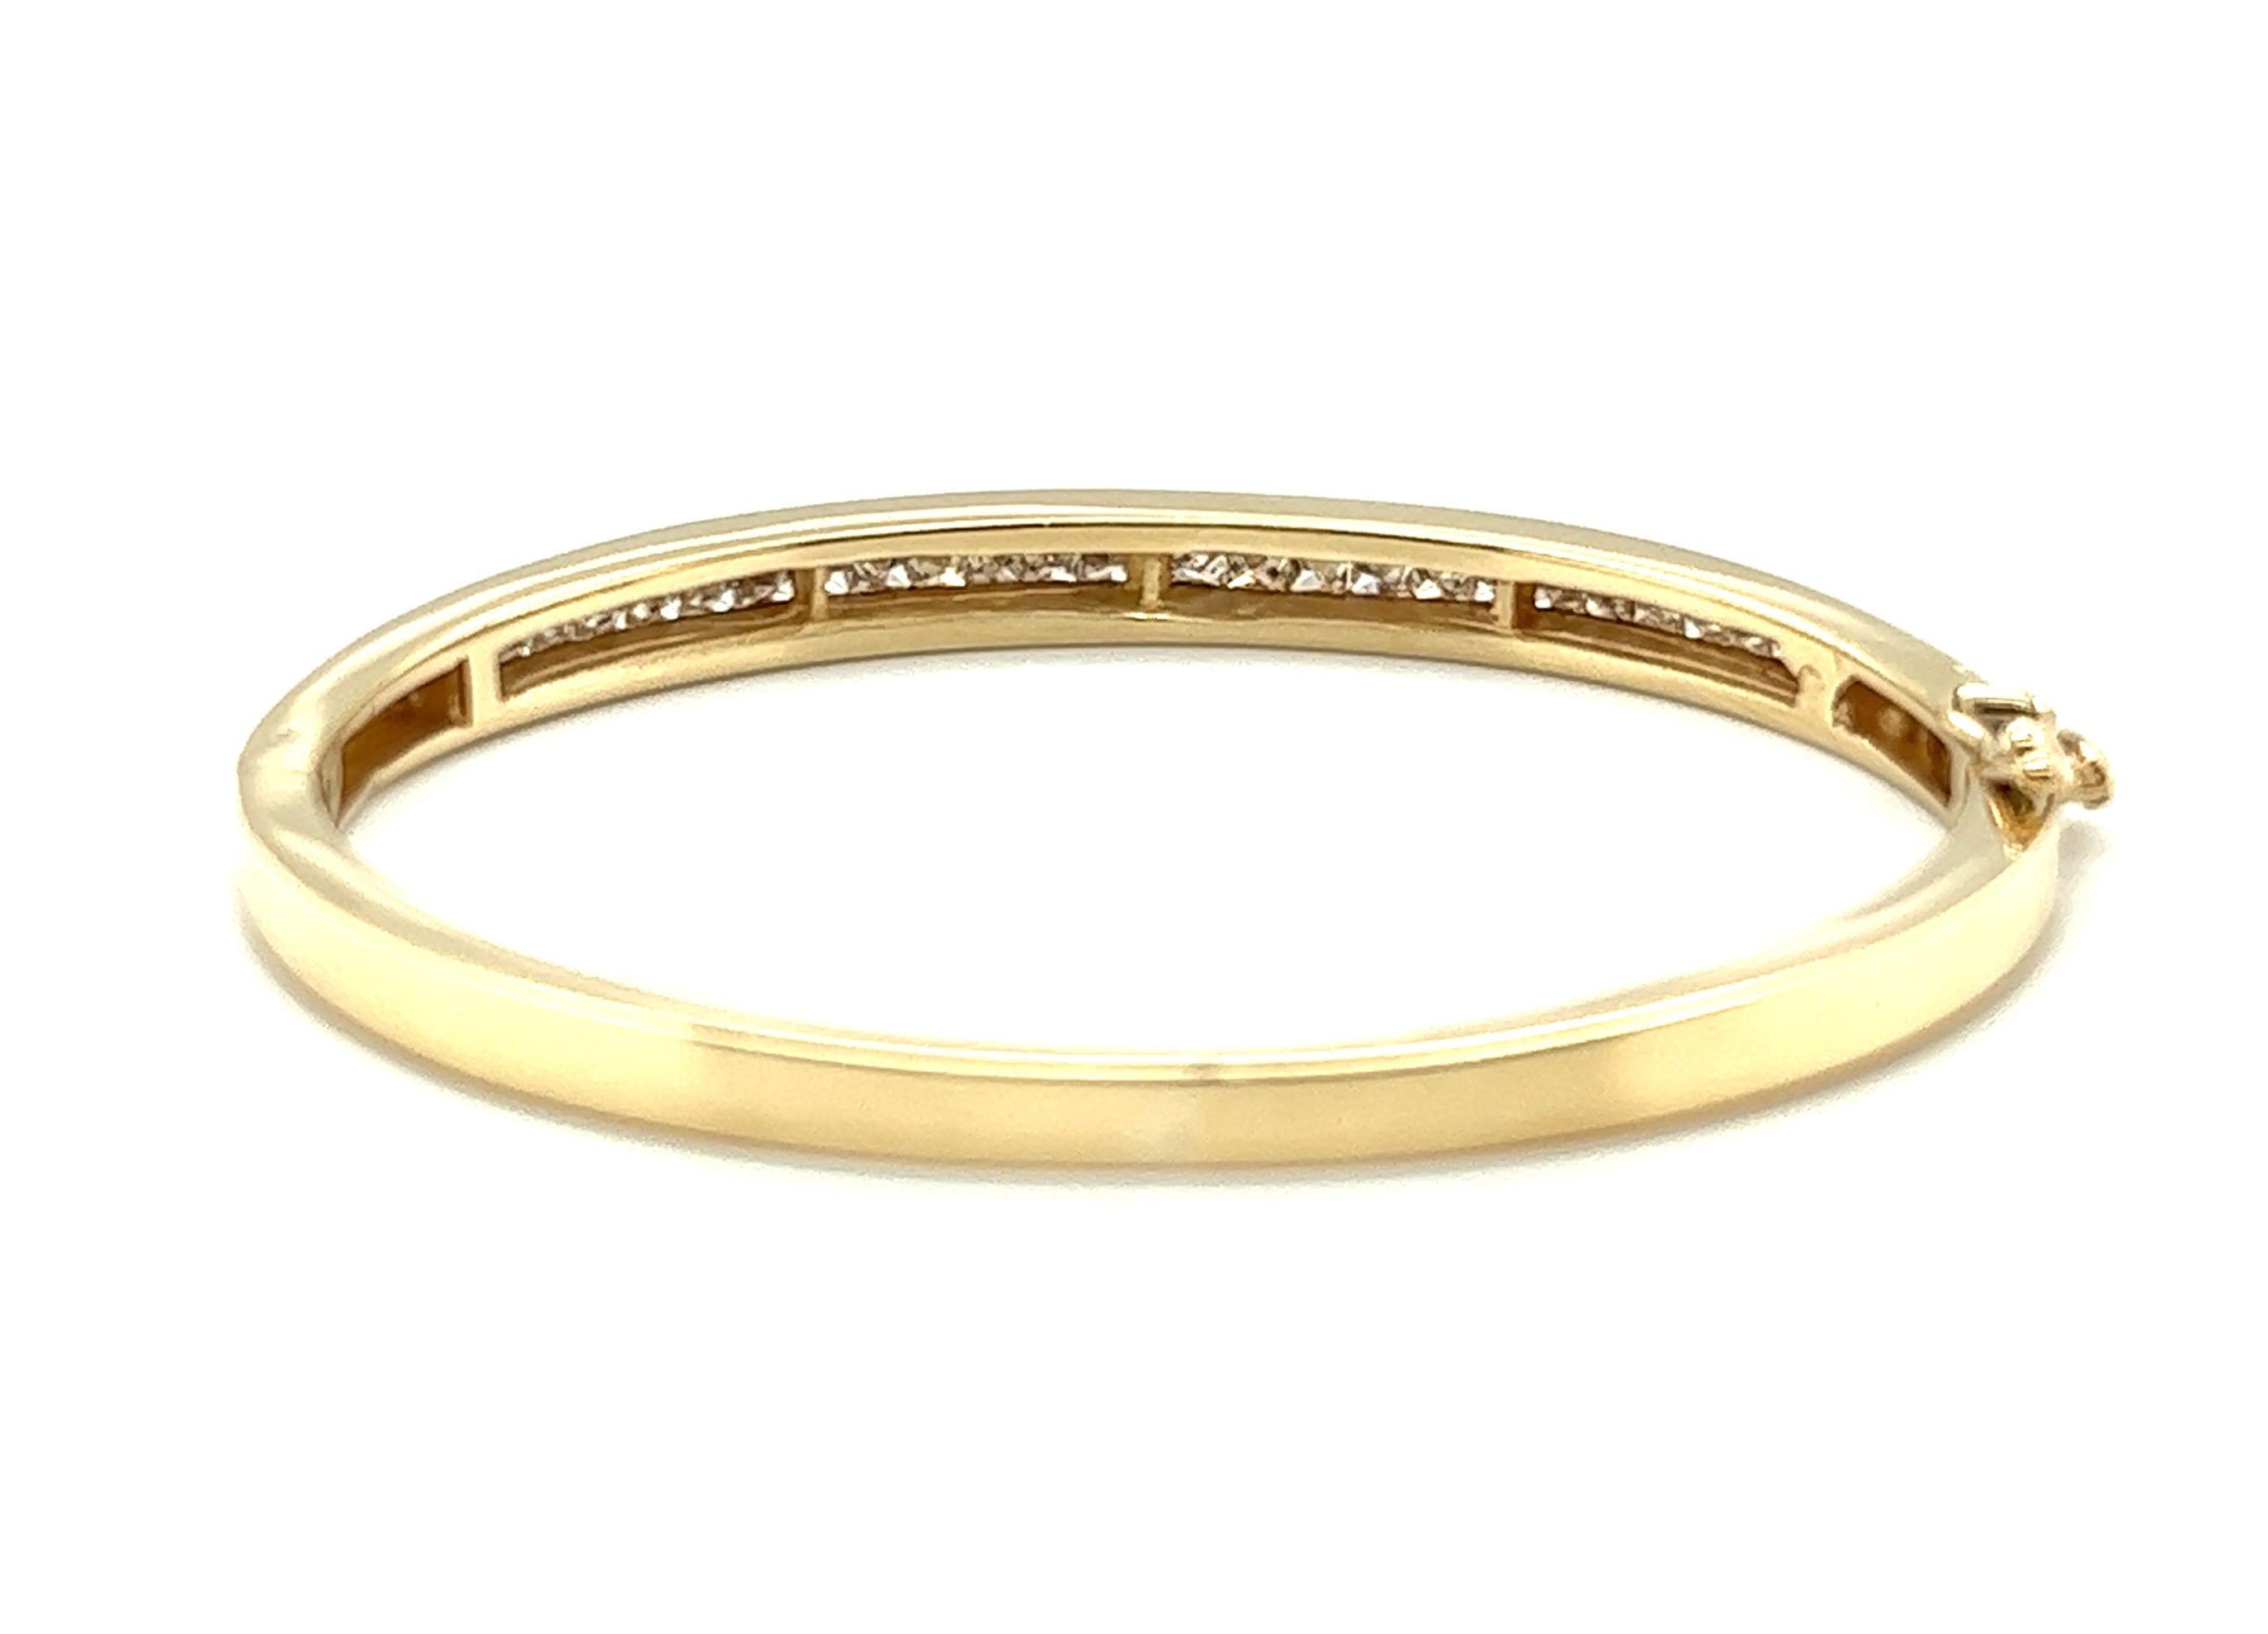 Diamond Bangle Bracelet 3 Carat Natural Mined Princess Cut Diamonds 14K Yellow Gold 



Featuring 26 Princess Cut Natural Mined Diamonds Totaling Approximately  3.00 Carat
 
Heavy 22.4 Grams of Solid 14K Gold 

That's Over $840 in Gold Value